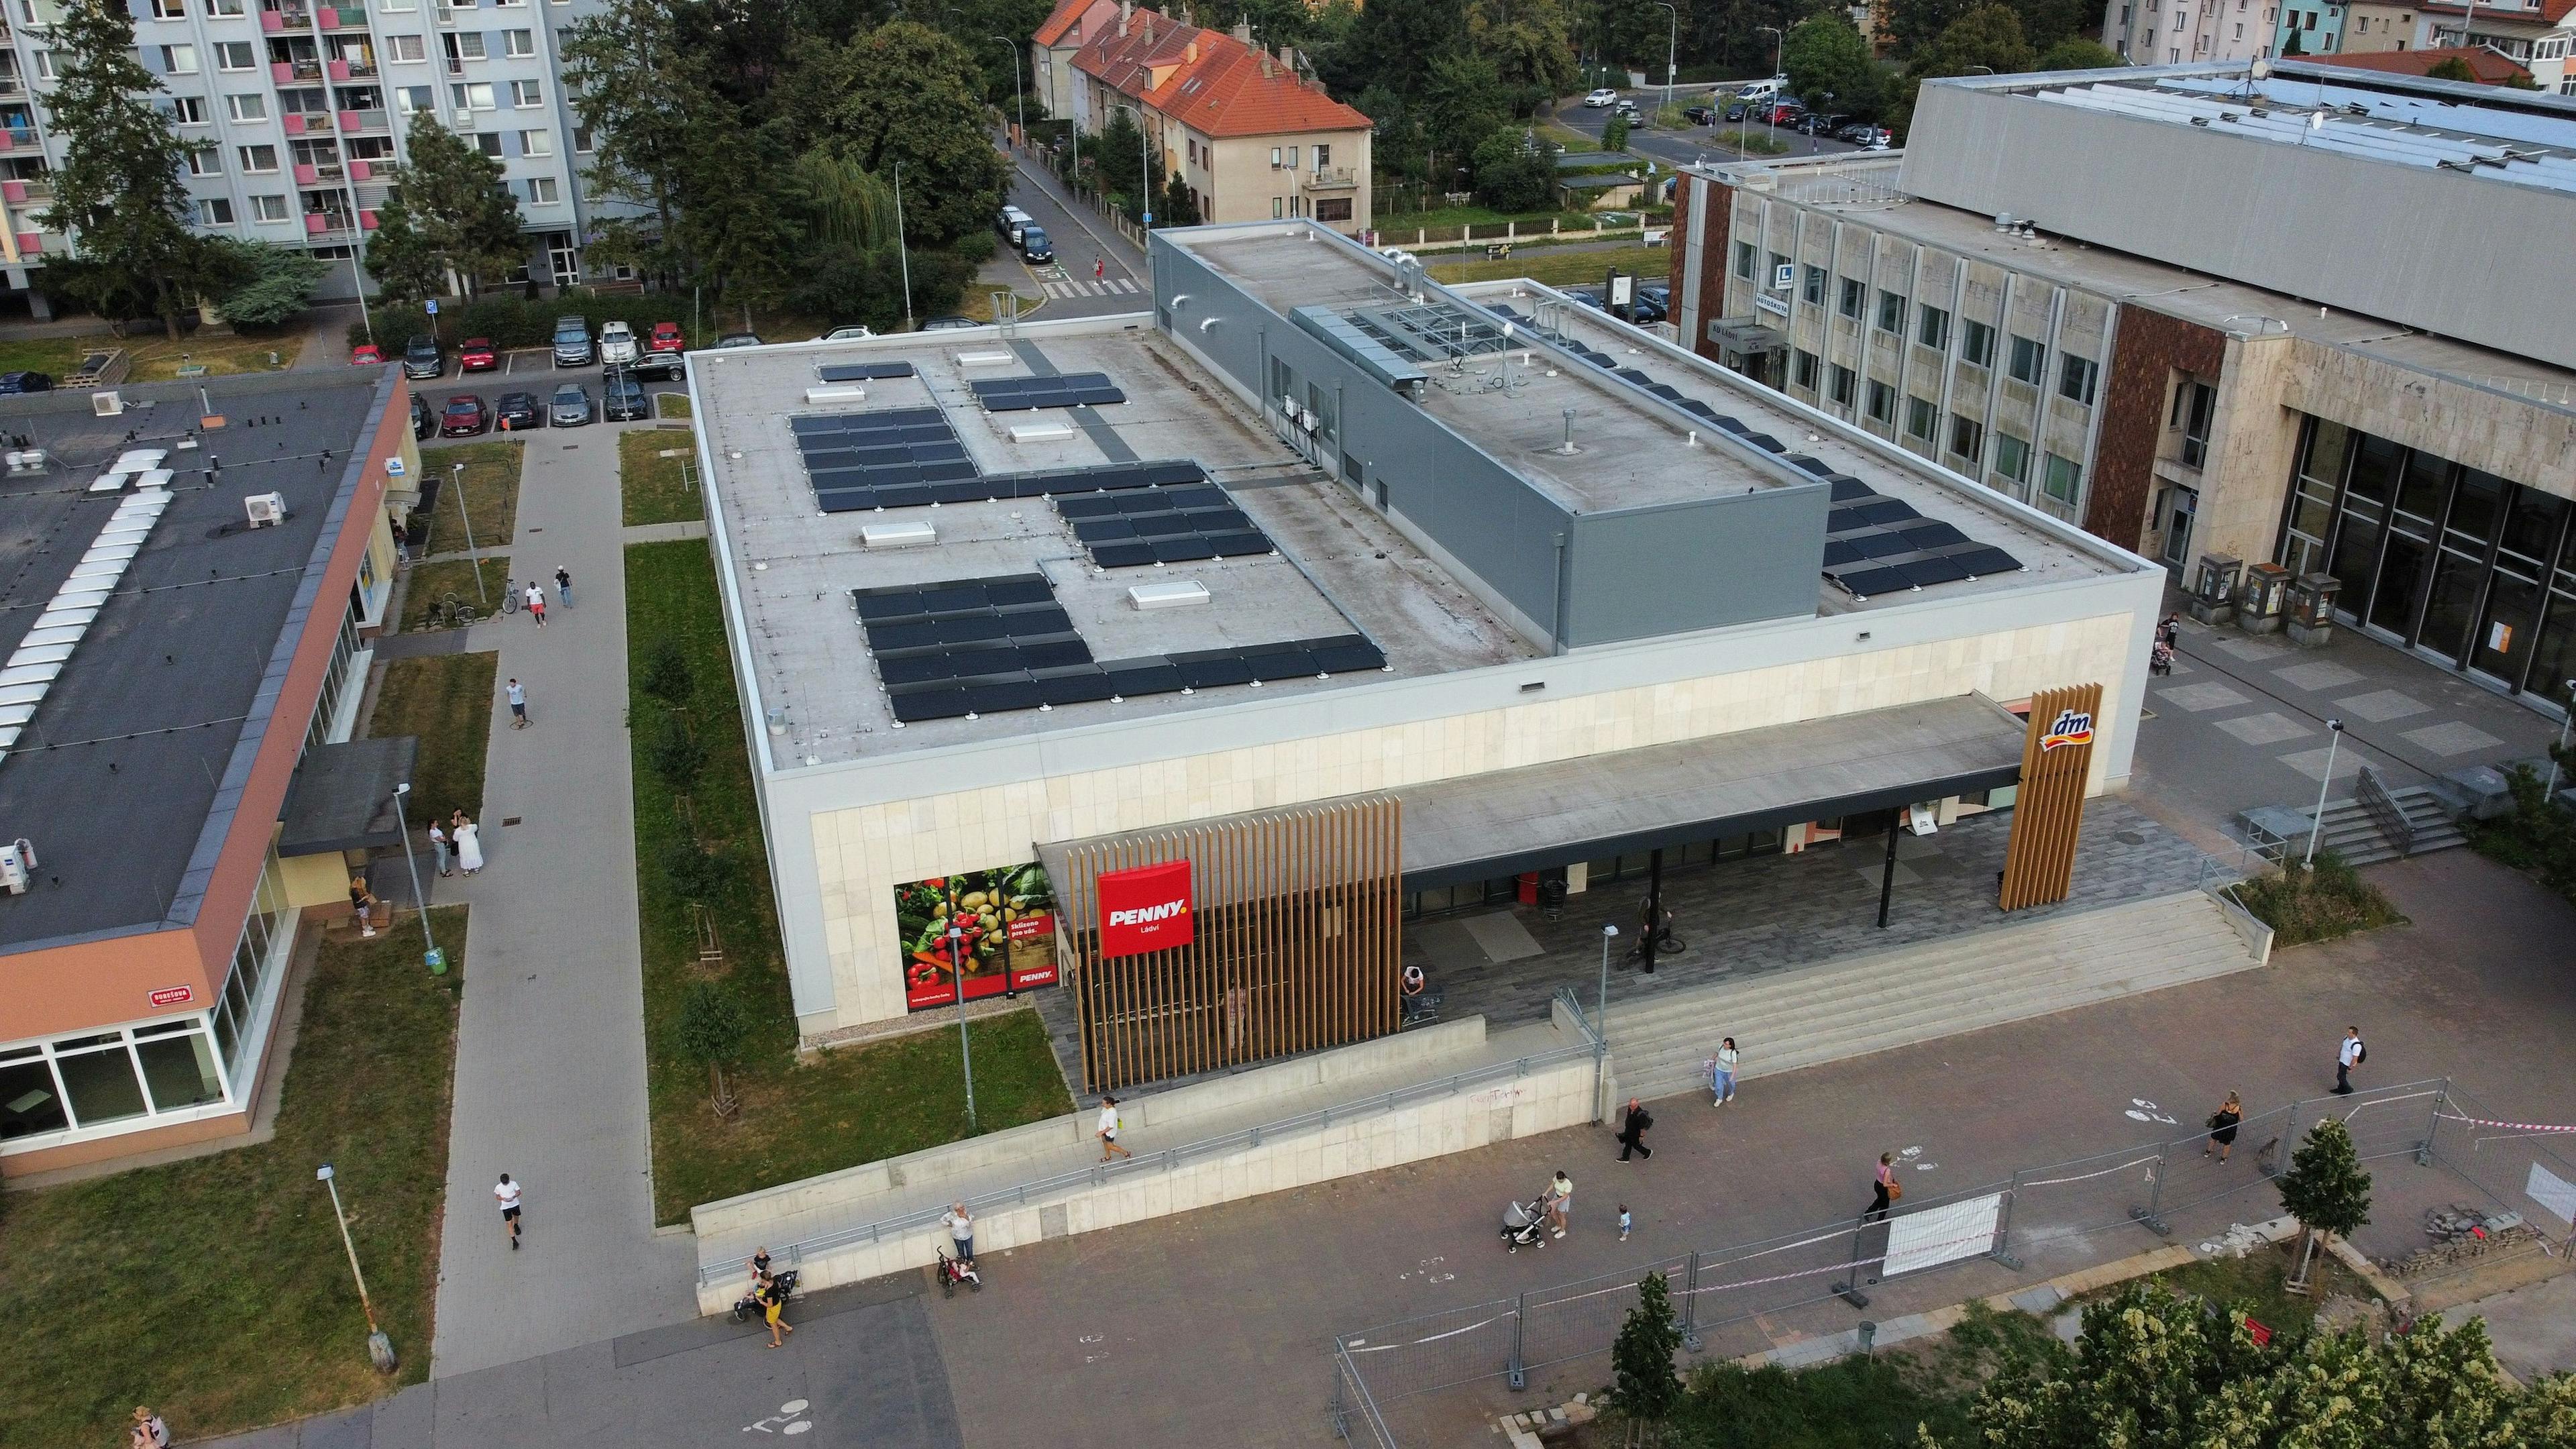 Installation of Rooftop PV for PENNY CZ - VIDEO